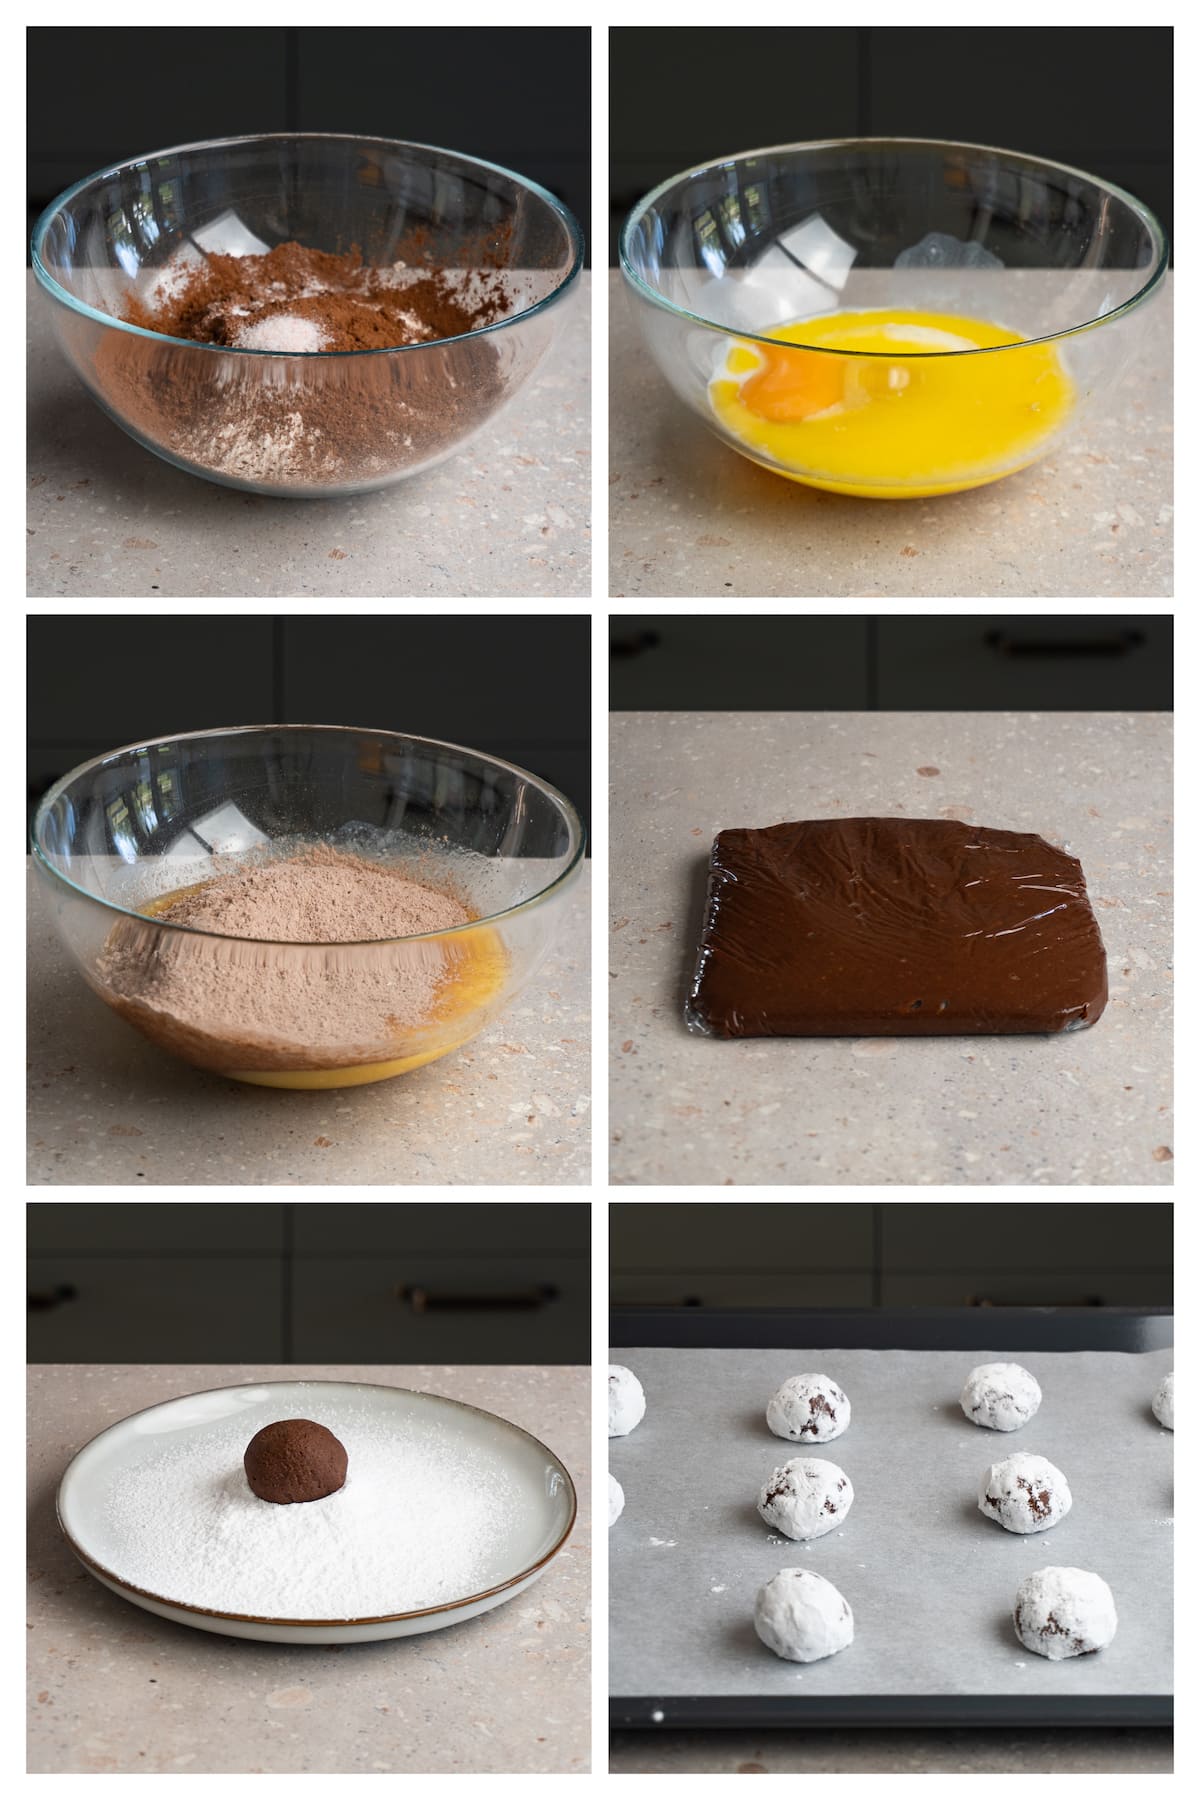 A collage image shows how to make chocolate crinkle cookies in six steps.